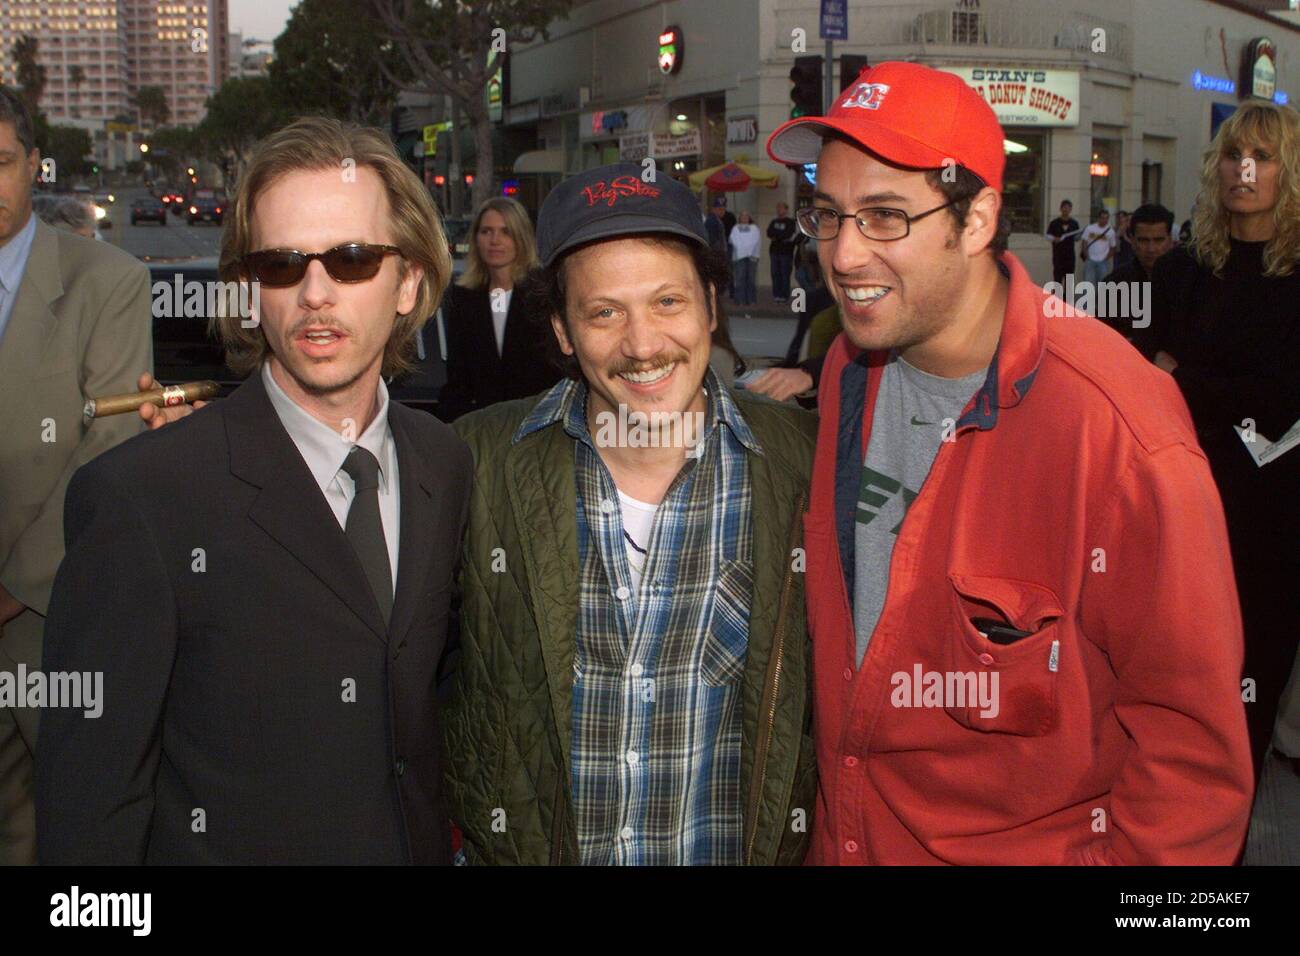 Actor David Spade (L), star of the new comedy film "Lost & Found," poses  with friends, comedic actors Rob Schneider (C) and Adam Sandler at the  film's premiere on April 21 in